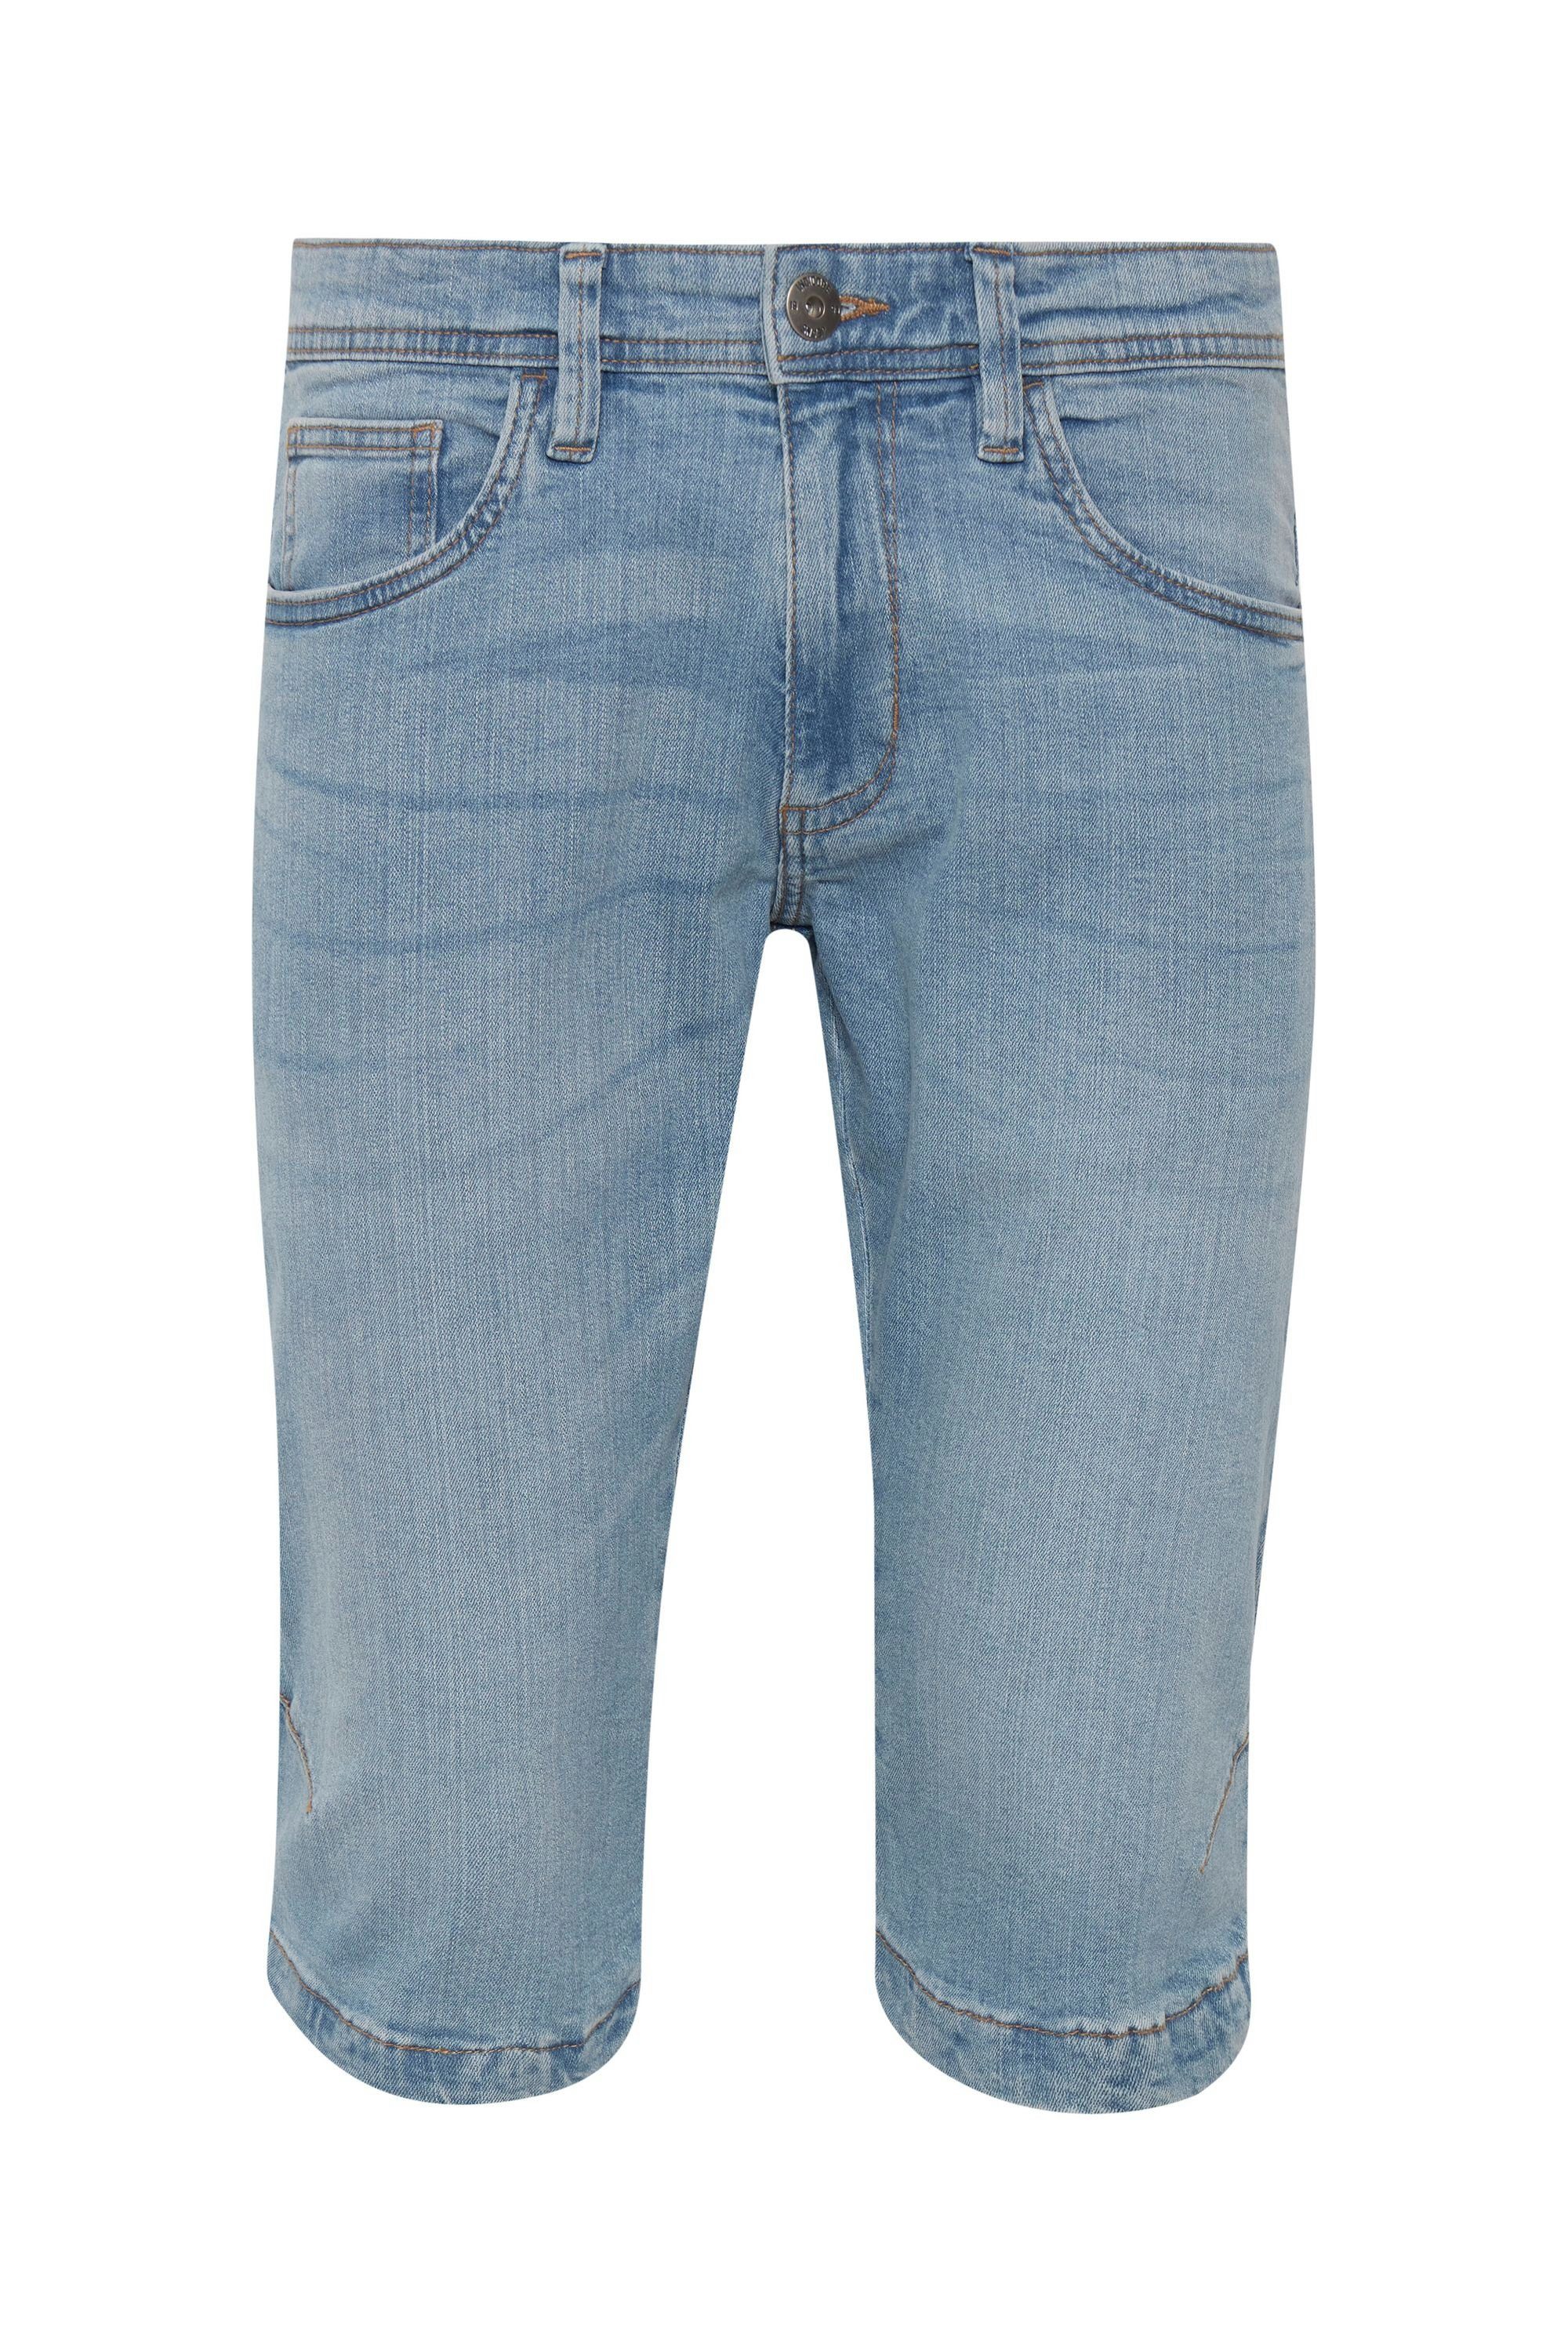 Wash Indicode IDQuince Blue (1014) Jeansshorts